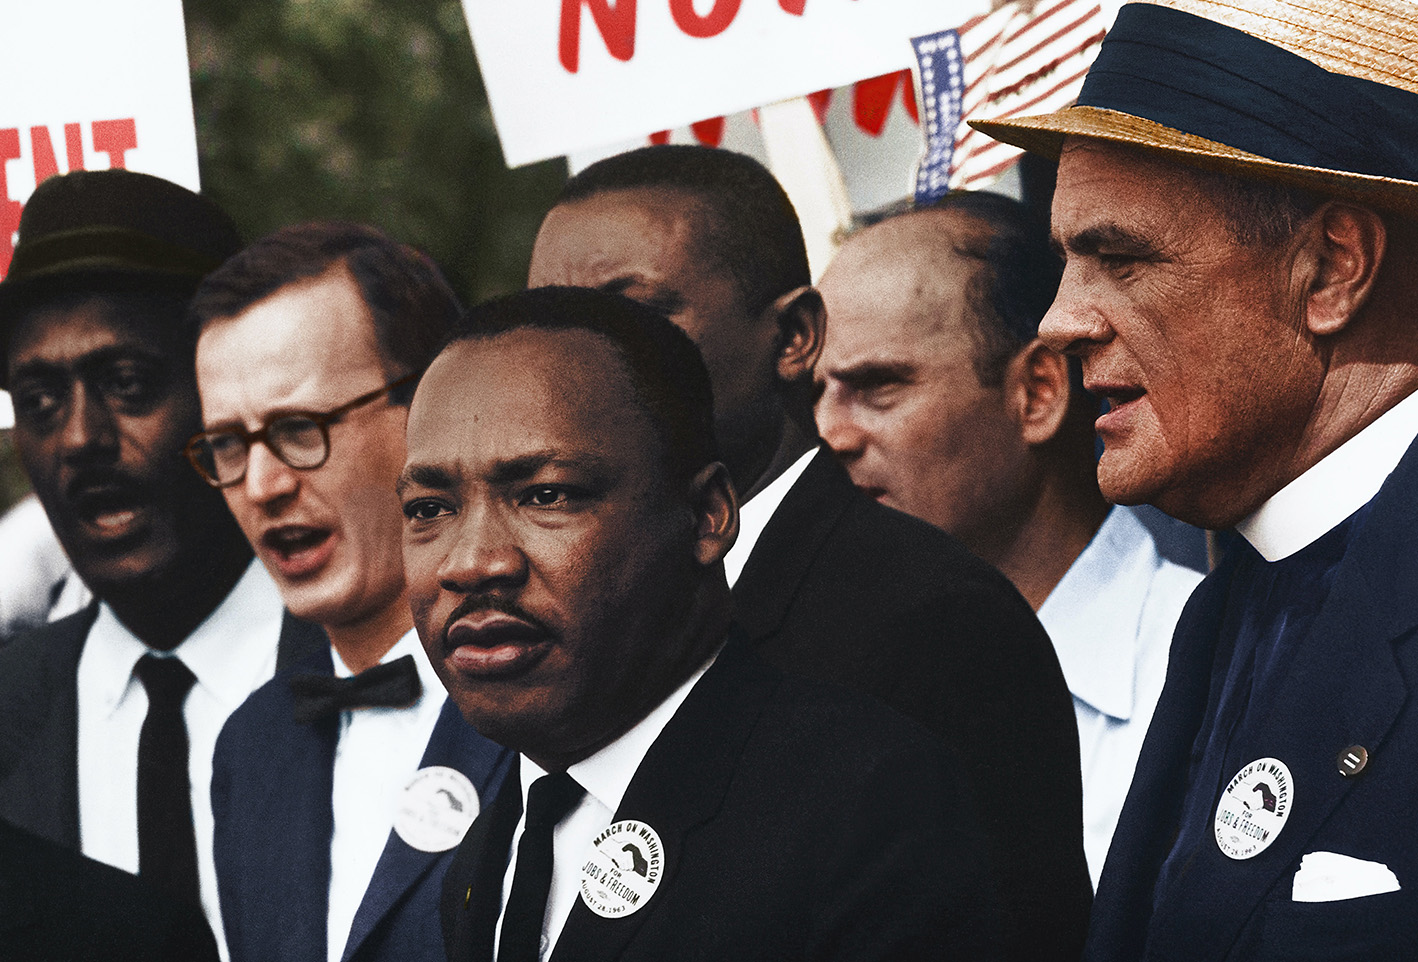 Featured image for “Honoring the Legacy of Dr. Martin Luther King”